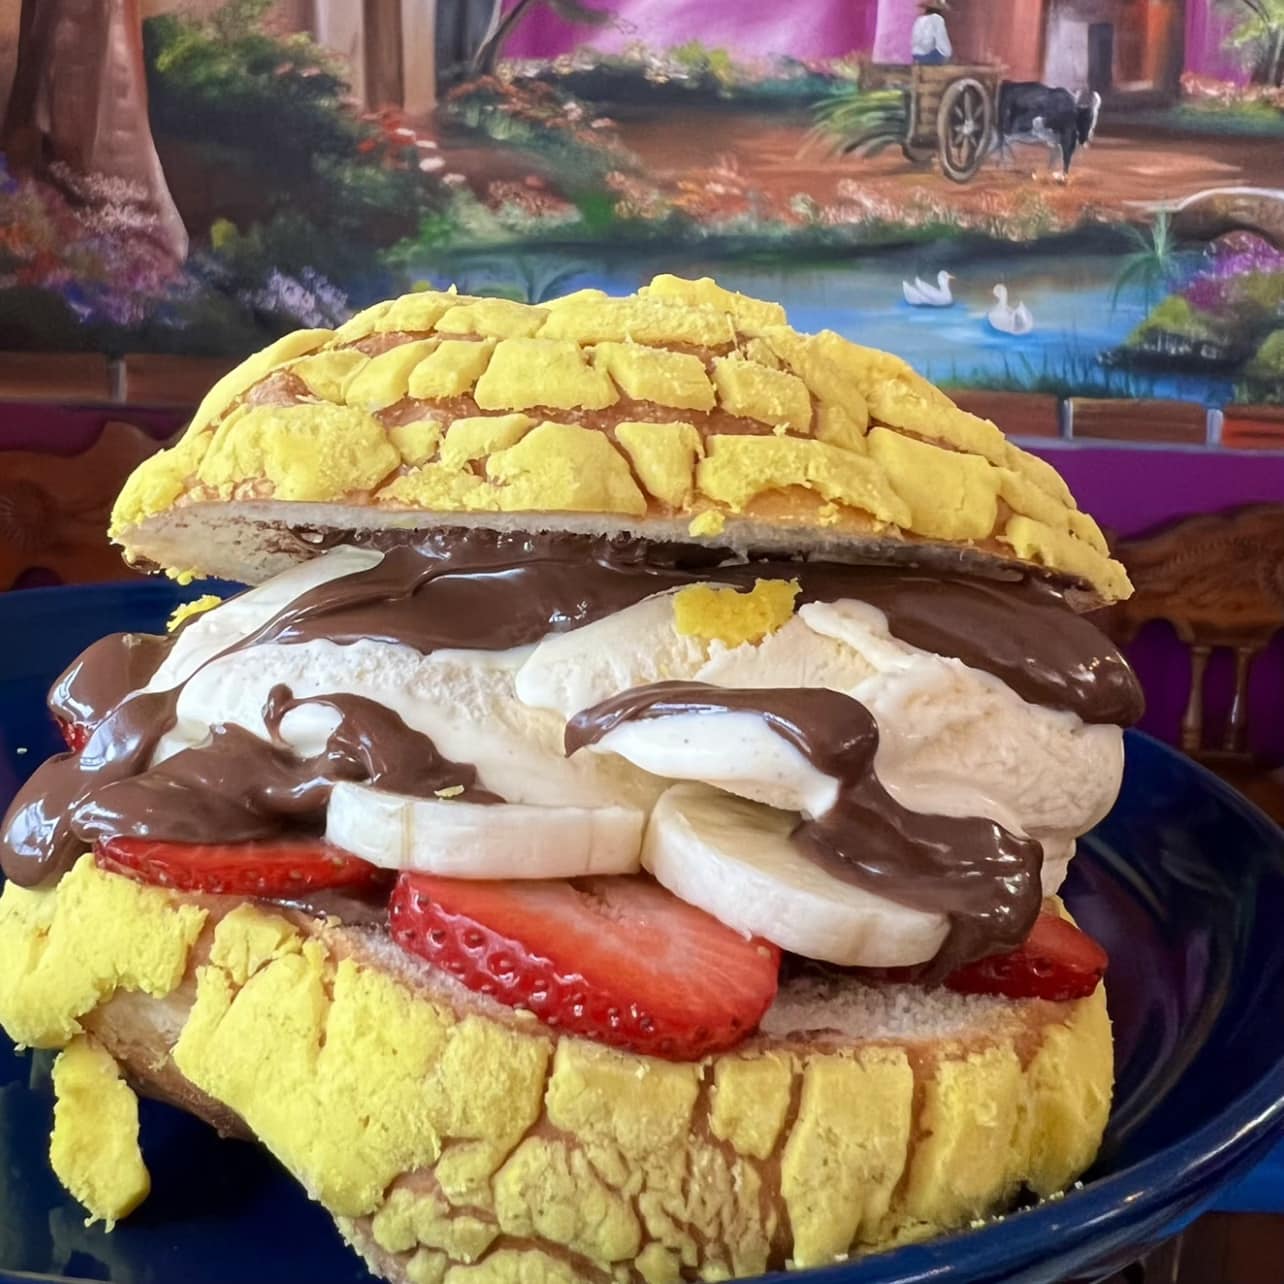 concha ice cream sandwich with strawberry and banana slices